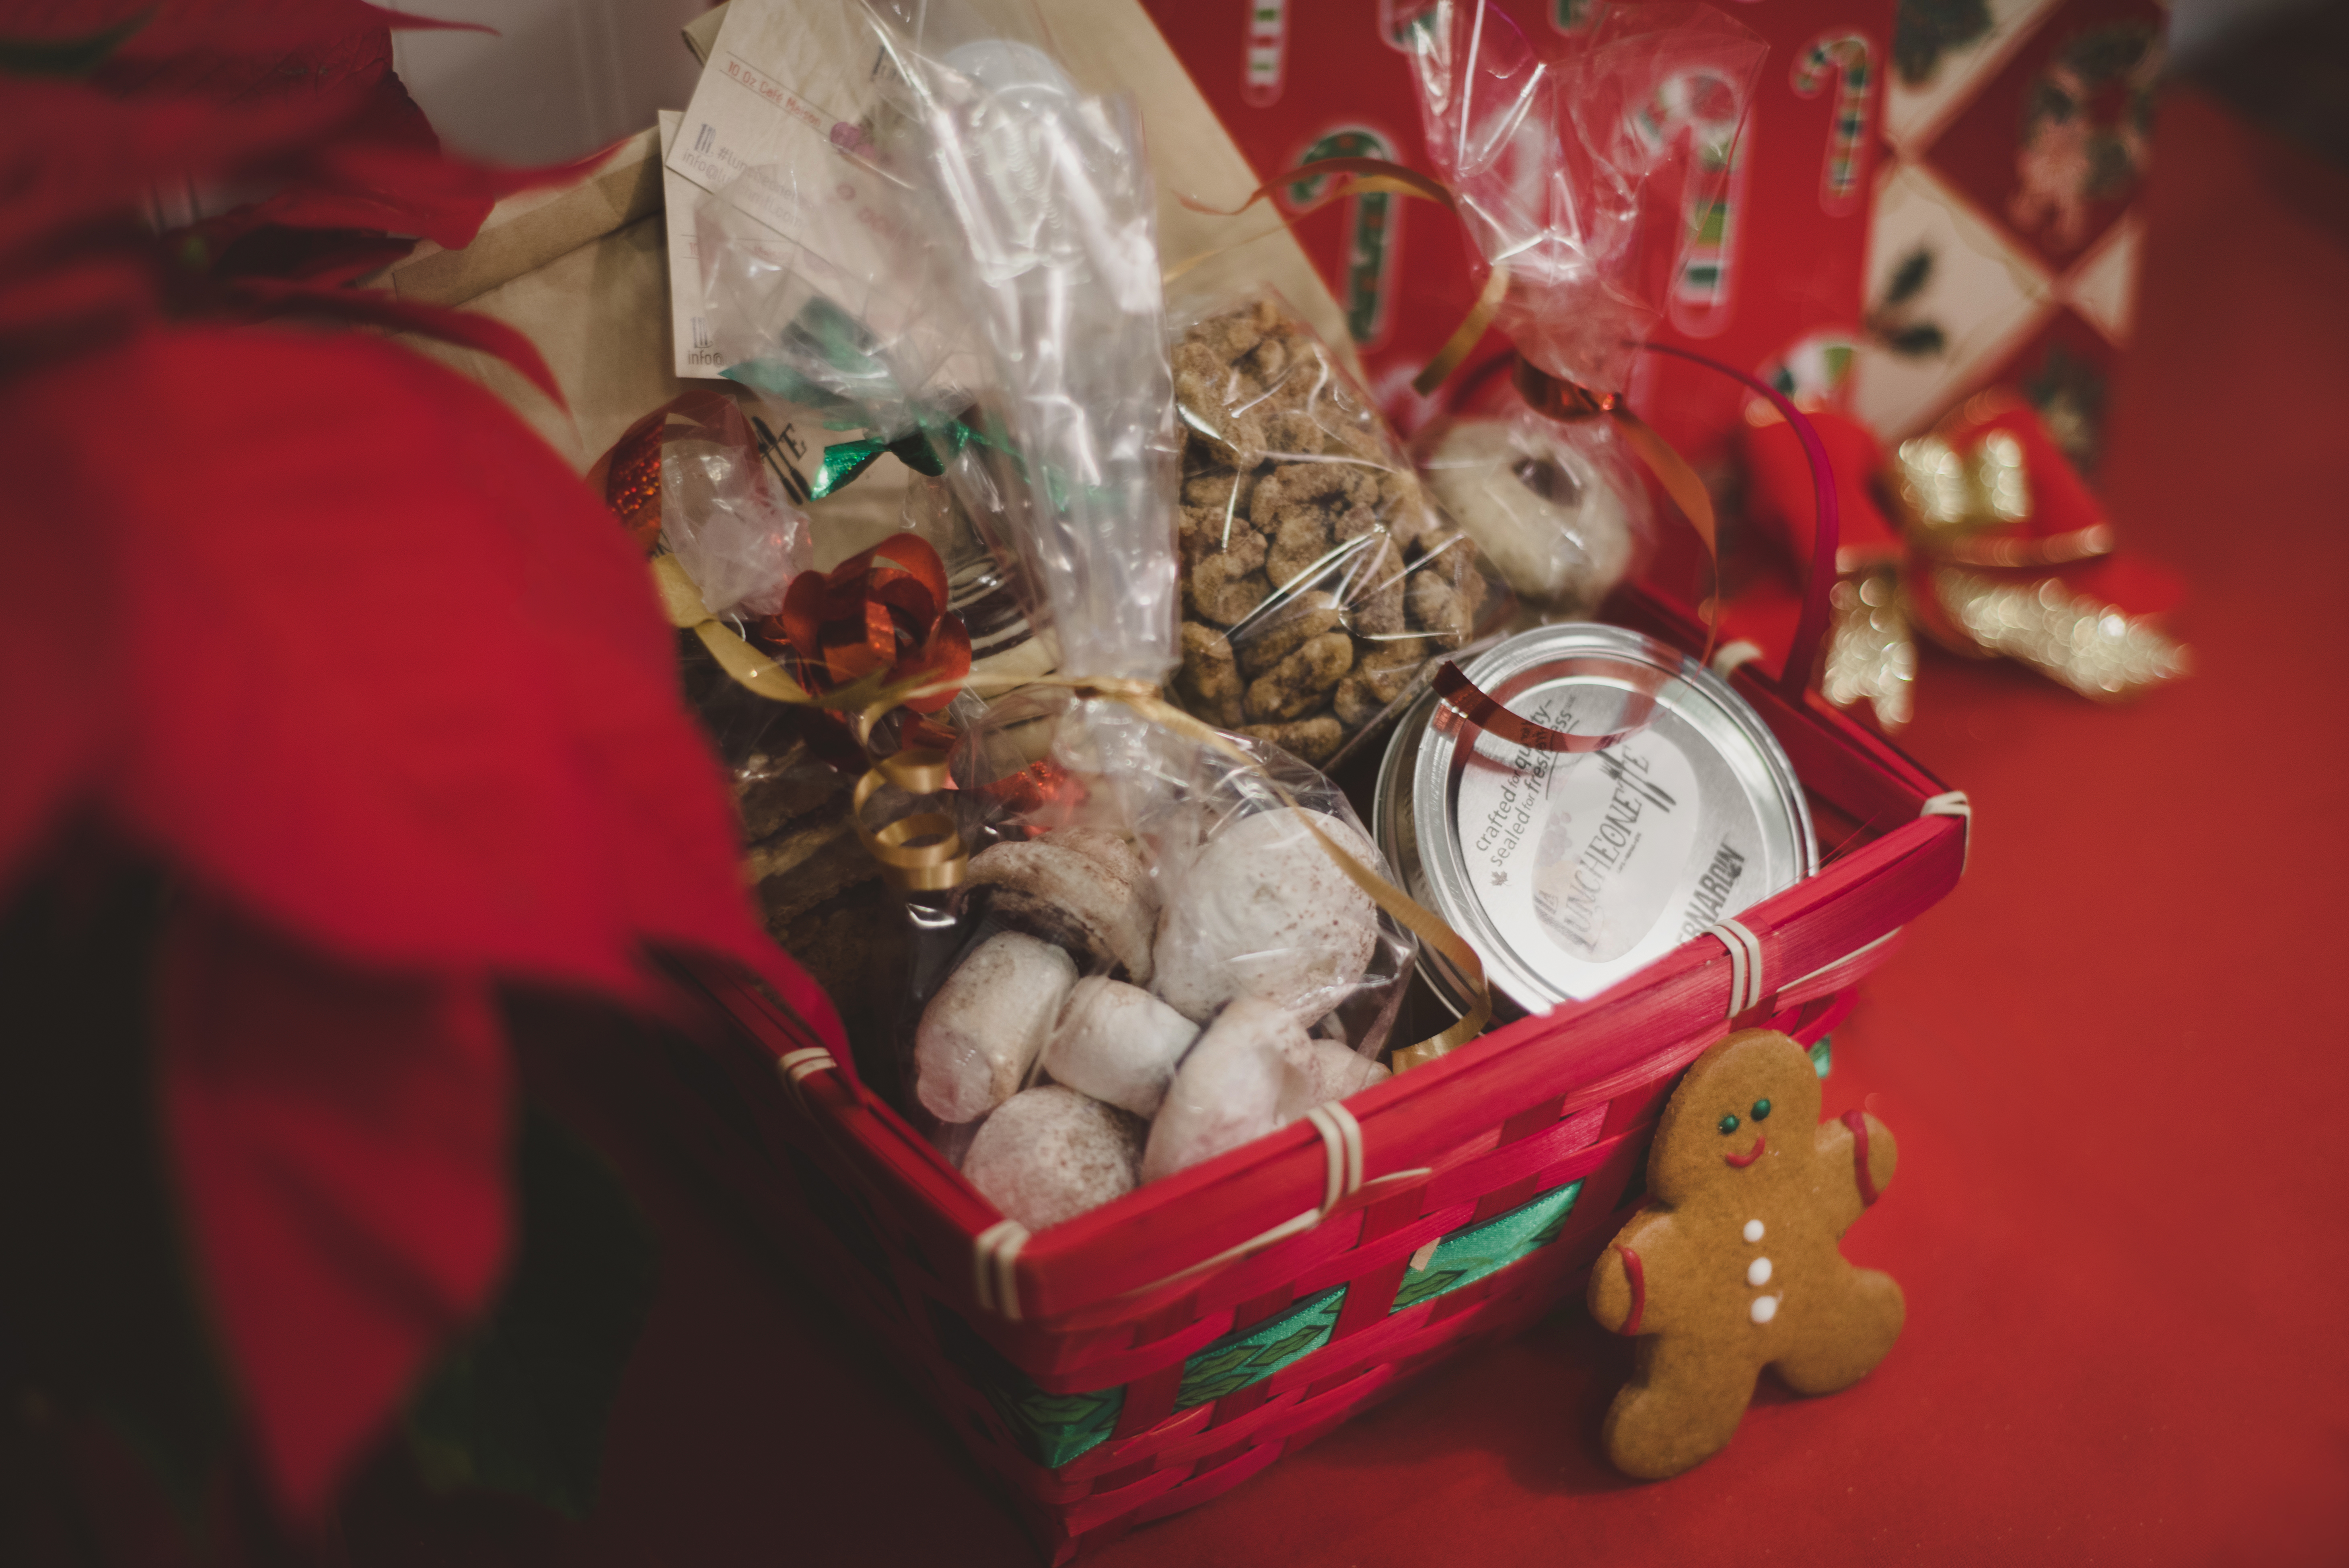 Luncheonette holiday baked goods basket